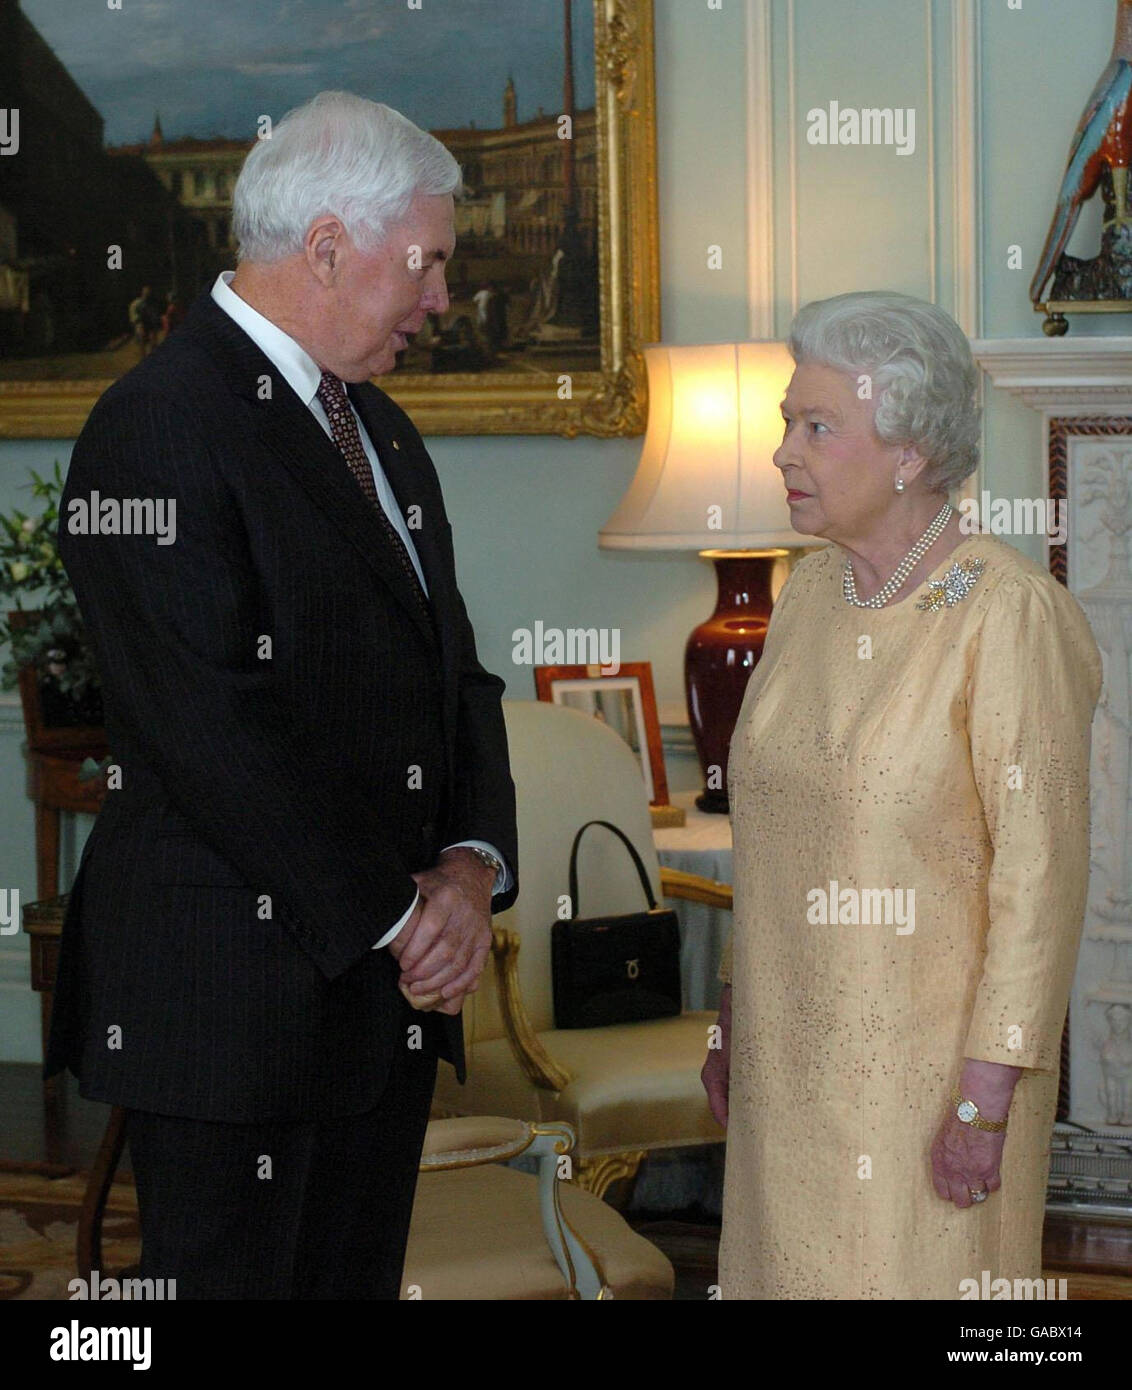 Ghana Facts & History - Queen Elizabeth II and the President of Ghana, John  Agyekum Kufuor, arrive for a State Banquet at Buckingham Palace on March  13, 2007. (Photo by Anwar Hussein